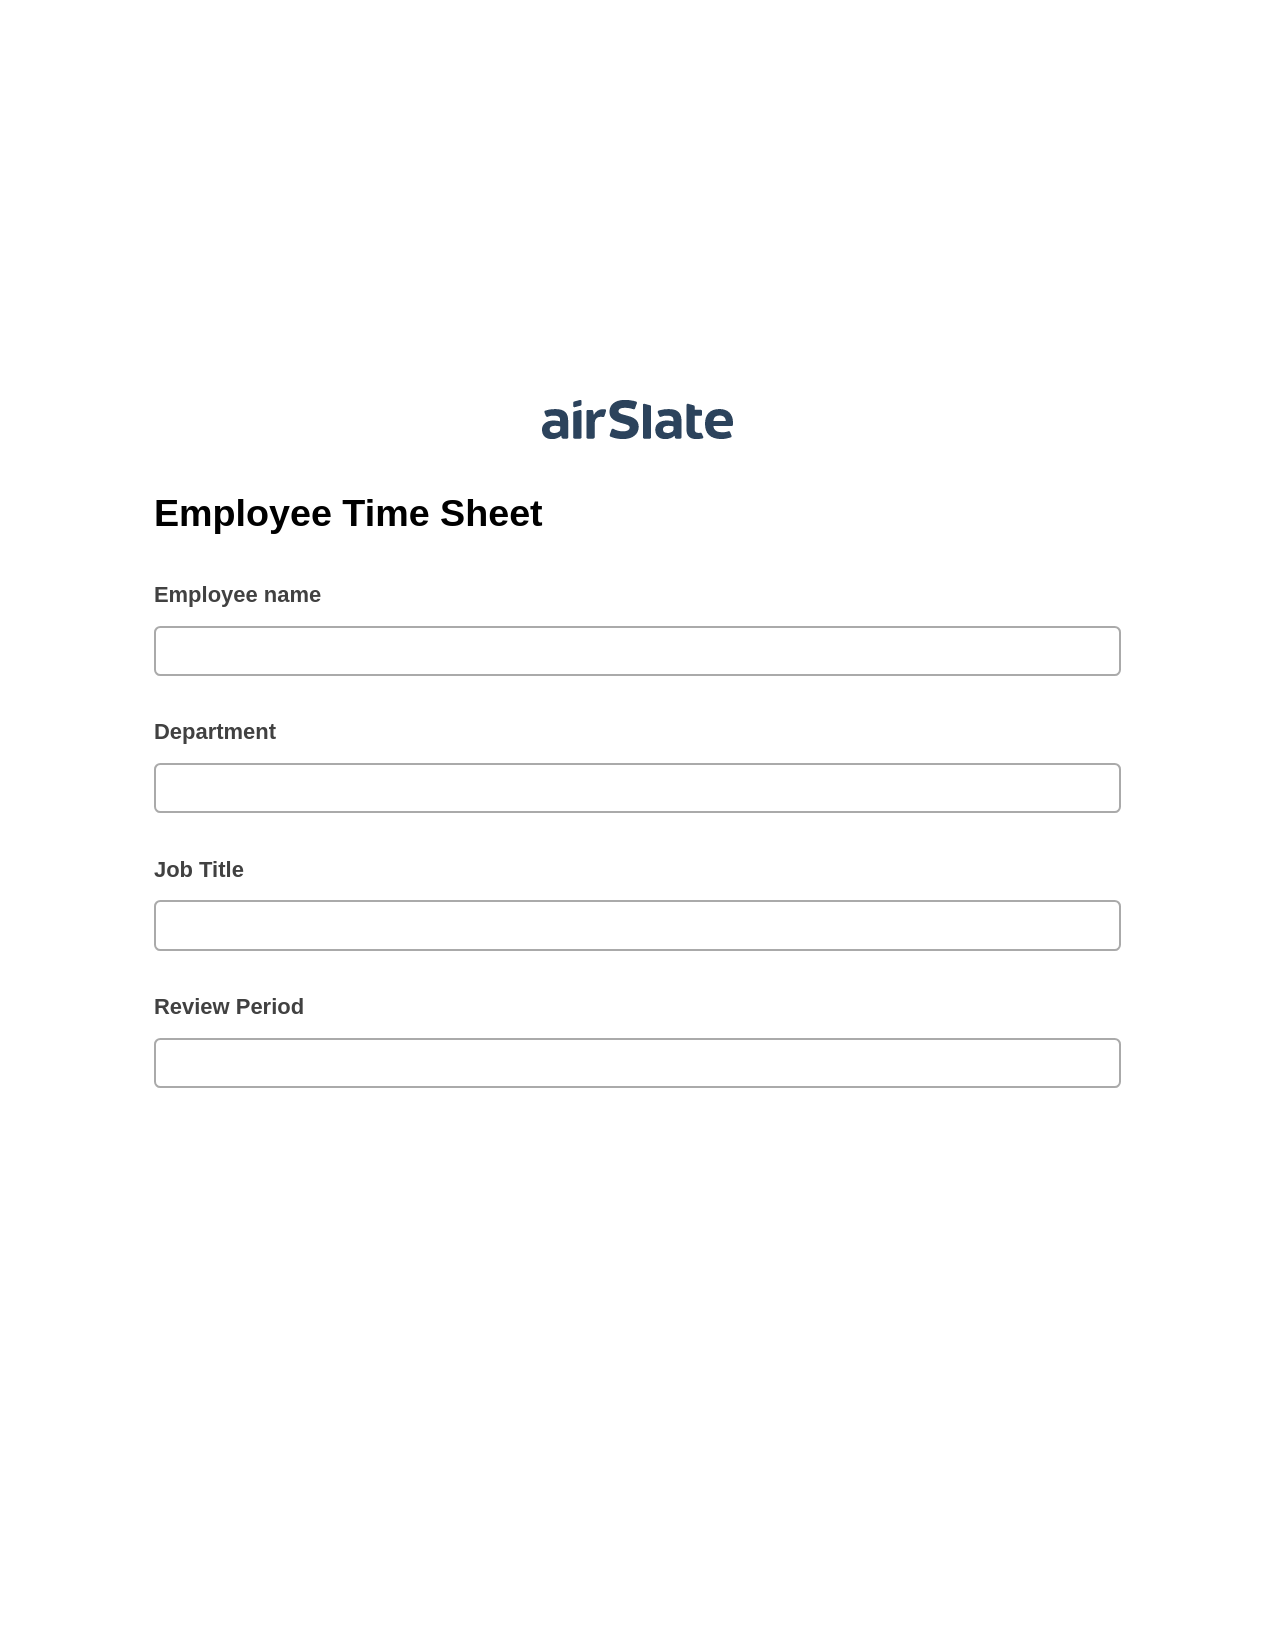 Employee Time Sheet Pre-fill Dropdowns from CSV file Bot, Update NetSuite Record Bot, Export to Smartsheet